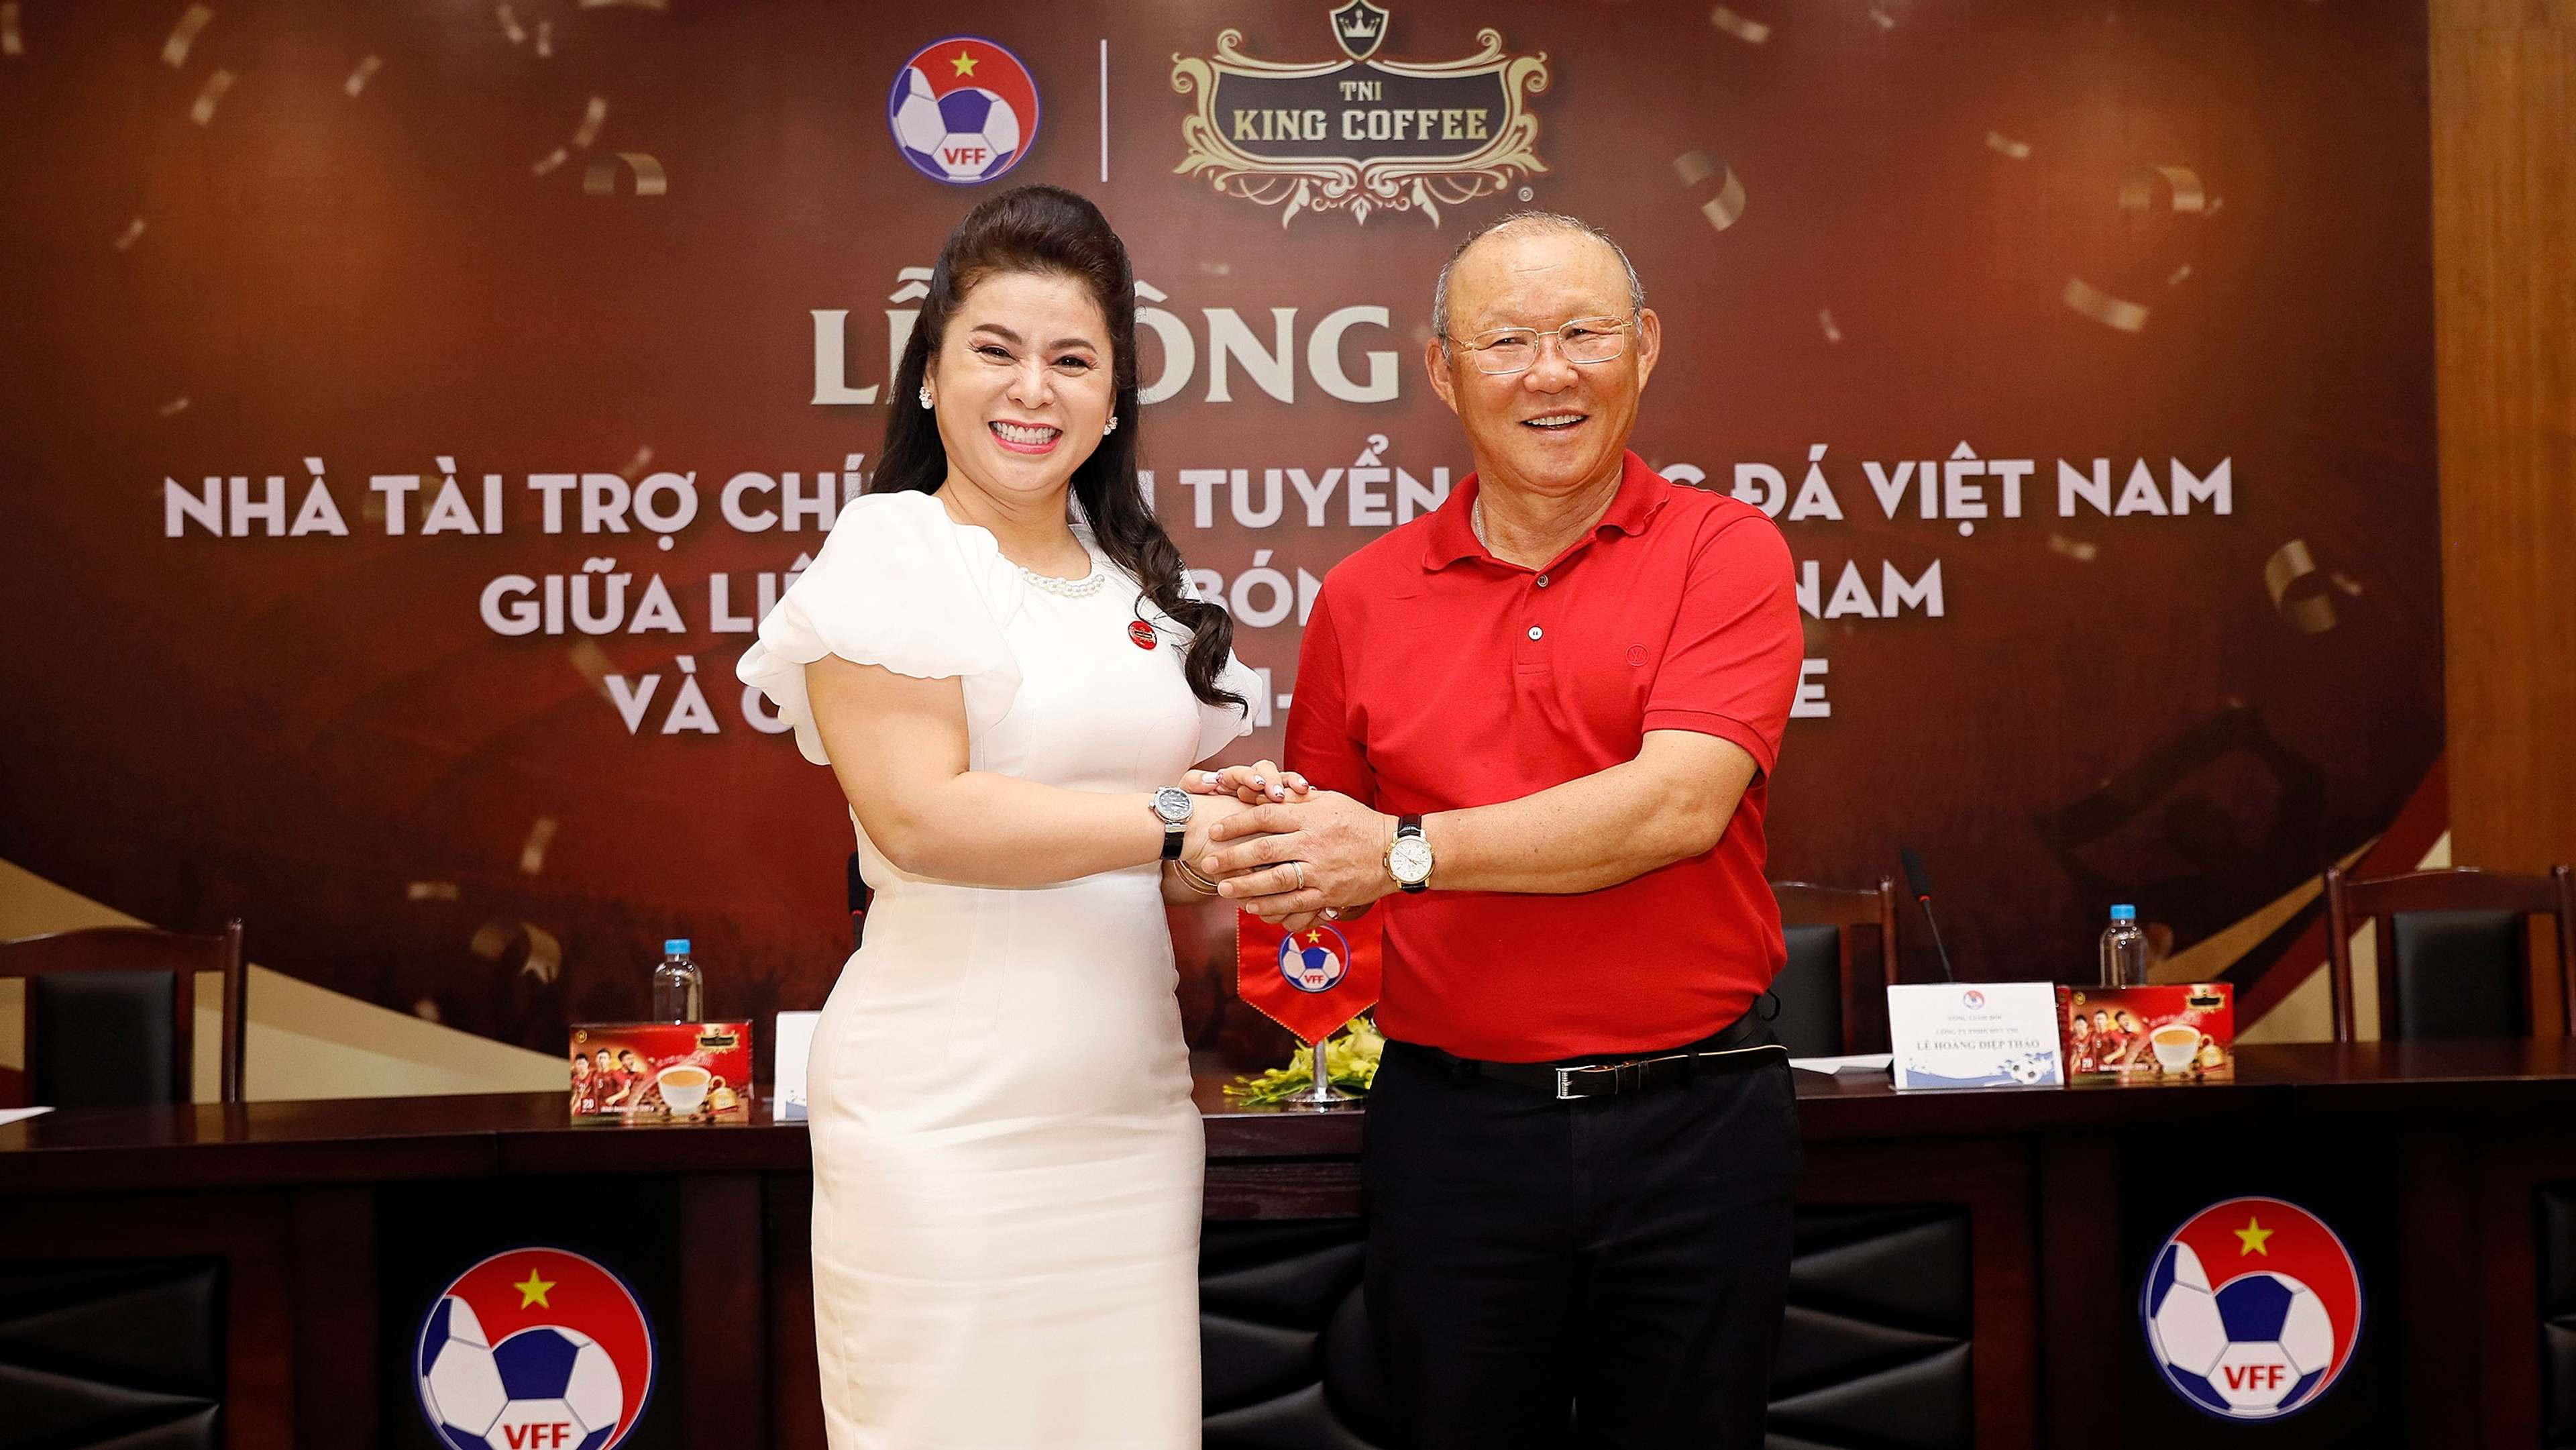 King Coffee vs VFF | Sponsor Signing Ceremony | 25 May 2020